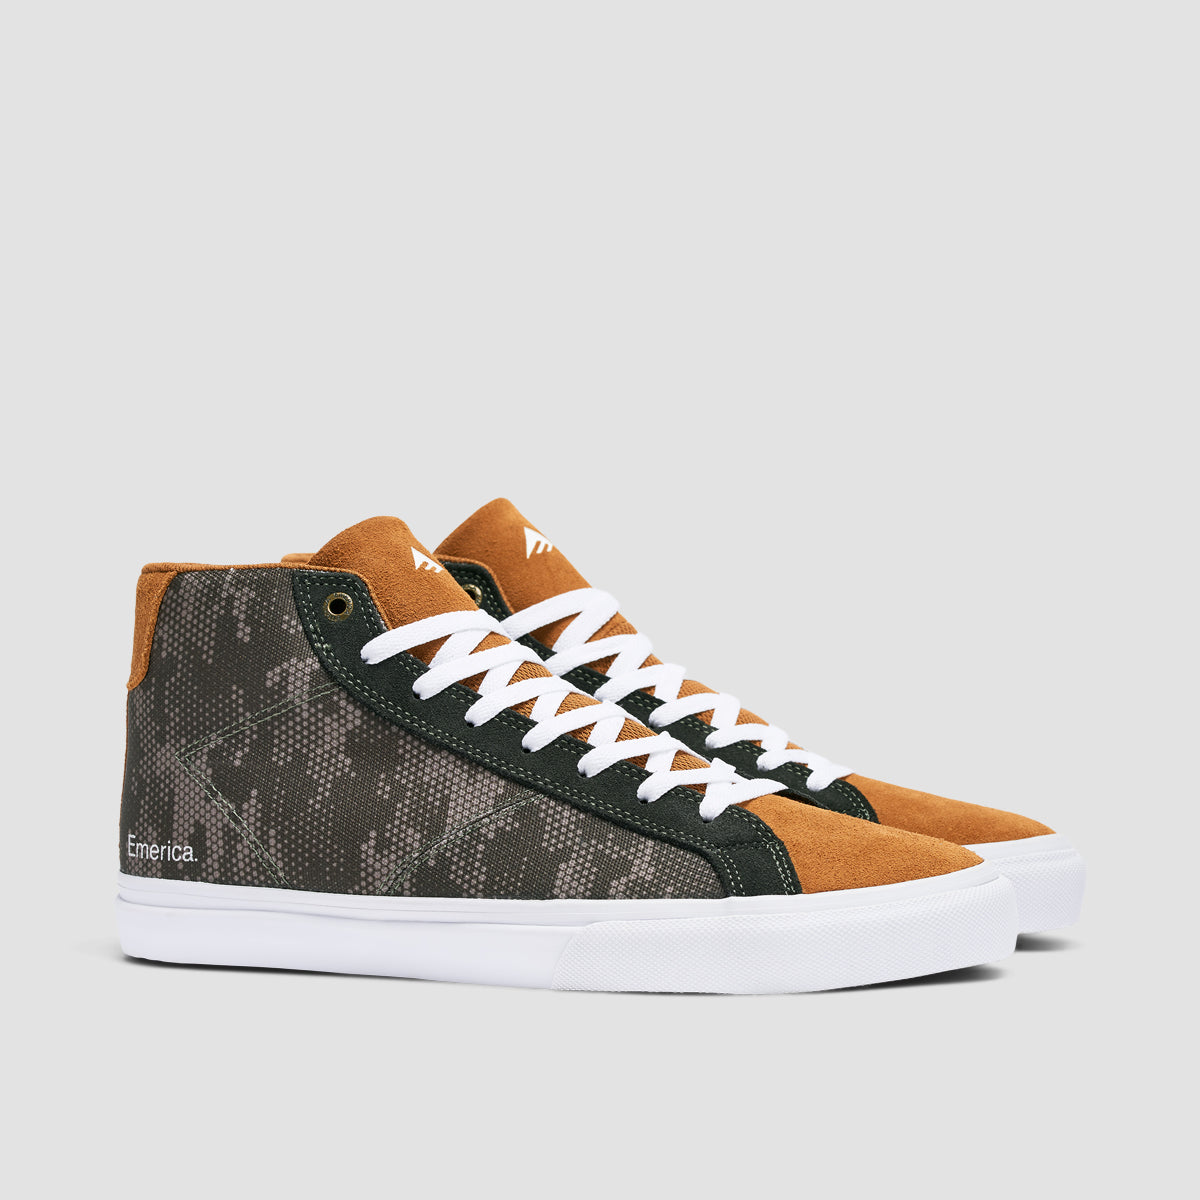 Emerica Omen High Top Shoes Olive/Tan